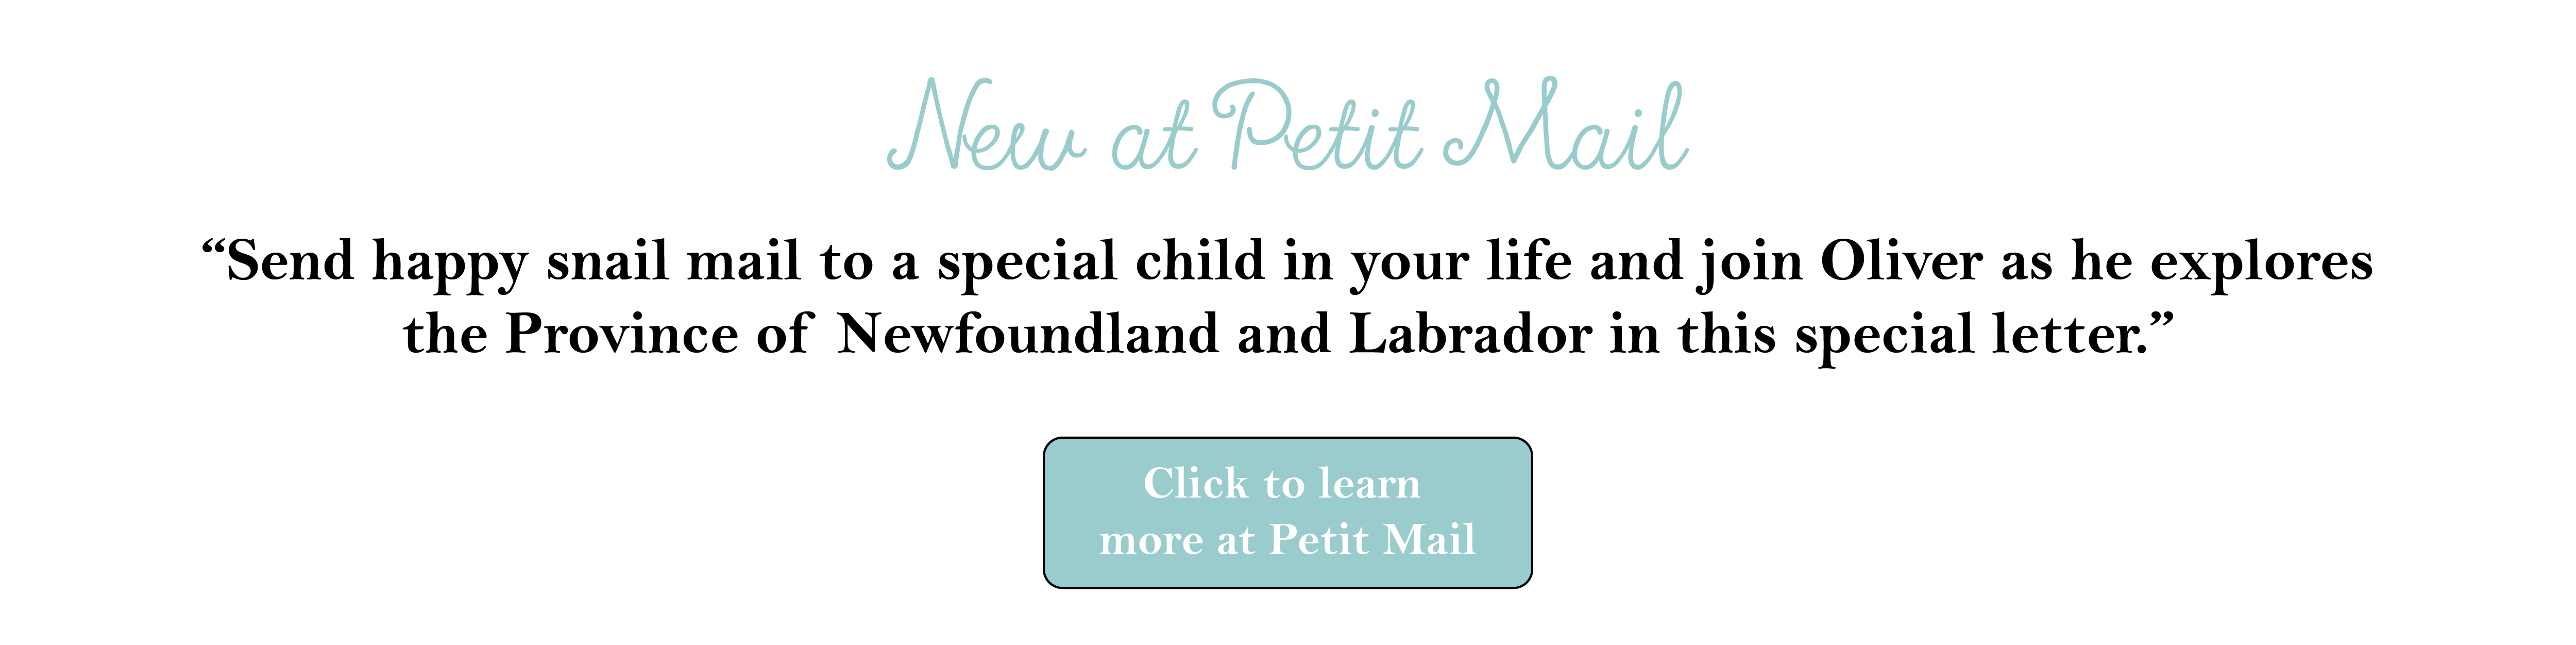 Learn About Newfoundland and Labrador via Snail Mail for Kids